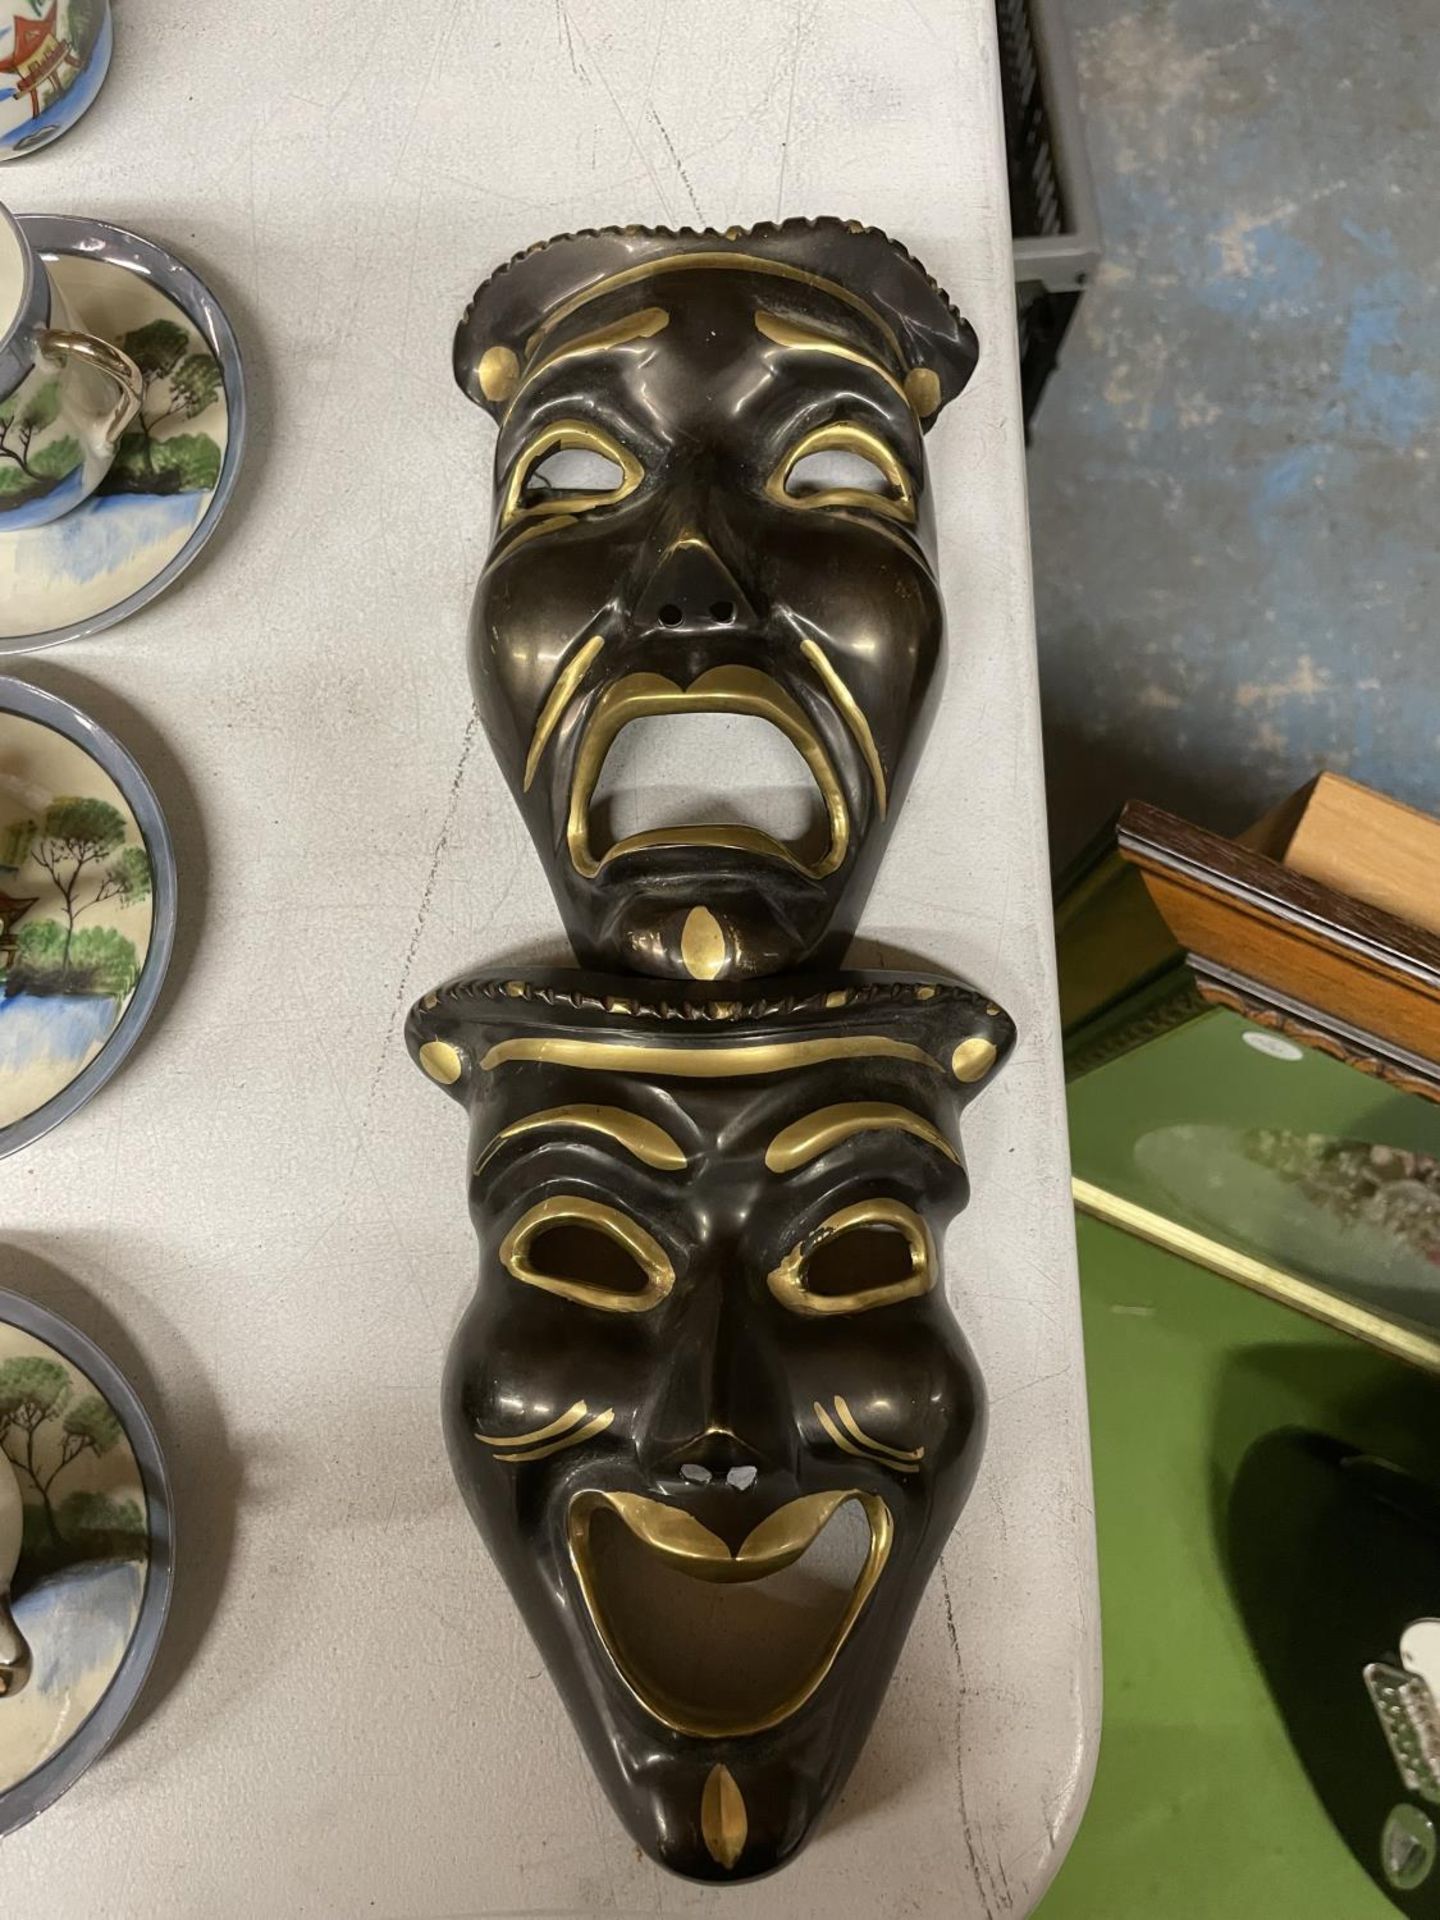 A PAIR OF BLACK AND GOLD COLOURED THEATRICAL COMEDY, TRAGEDY MASKS 17CM X 13CM